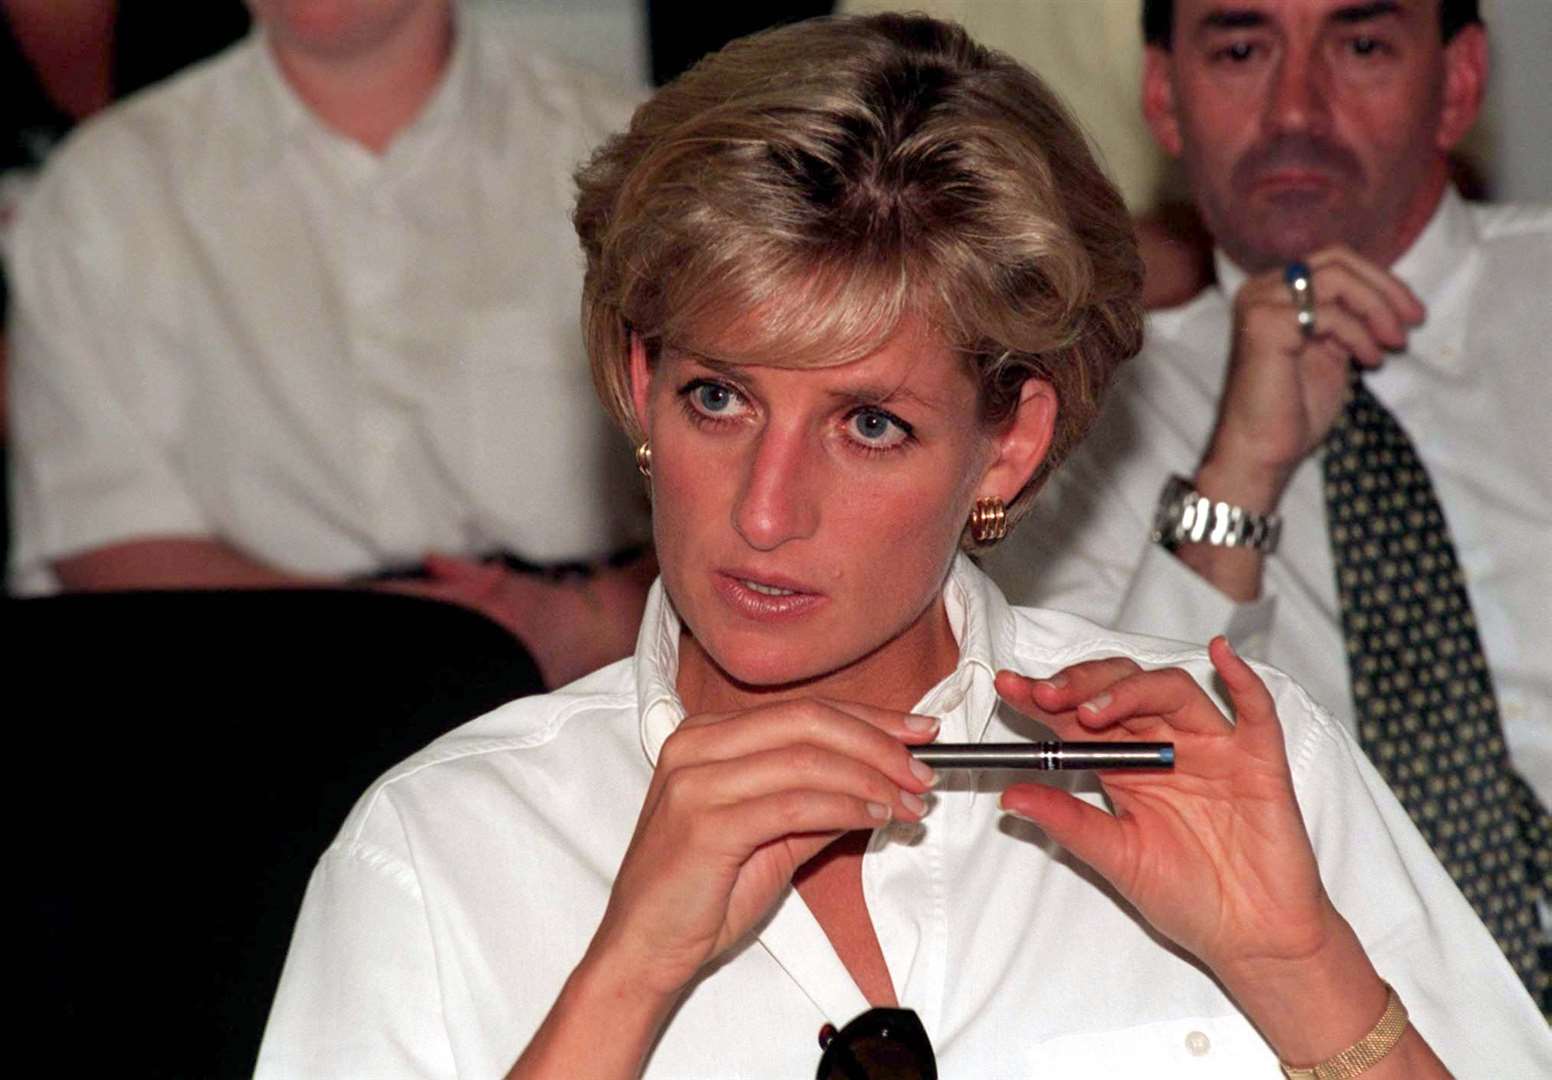 During her bombshell Panorama interview Diana declared ‘Well, there were three of us in this marriage, so it was a bit crowded’ (John Stillwell/PA)